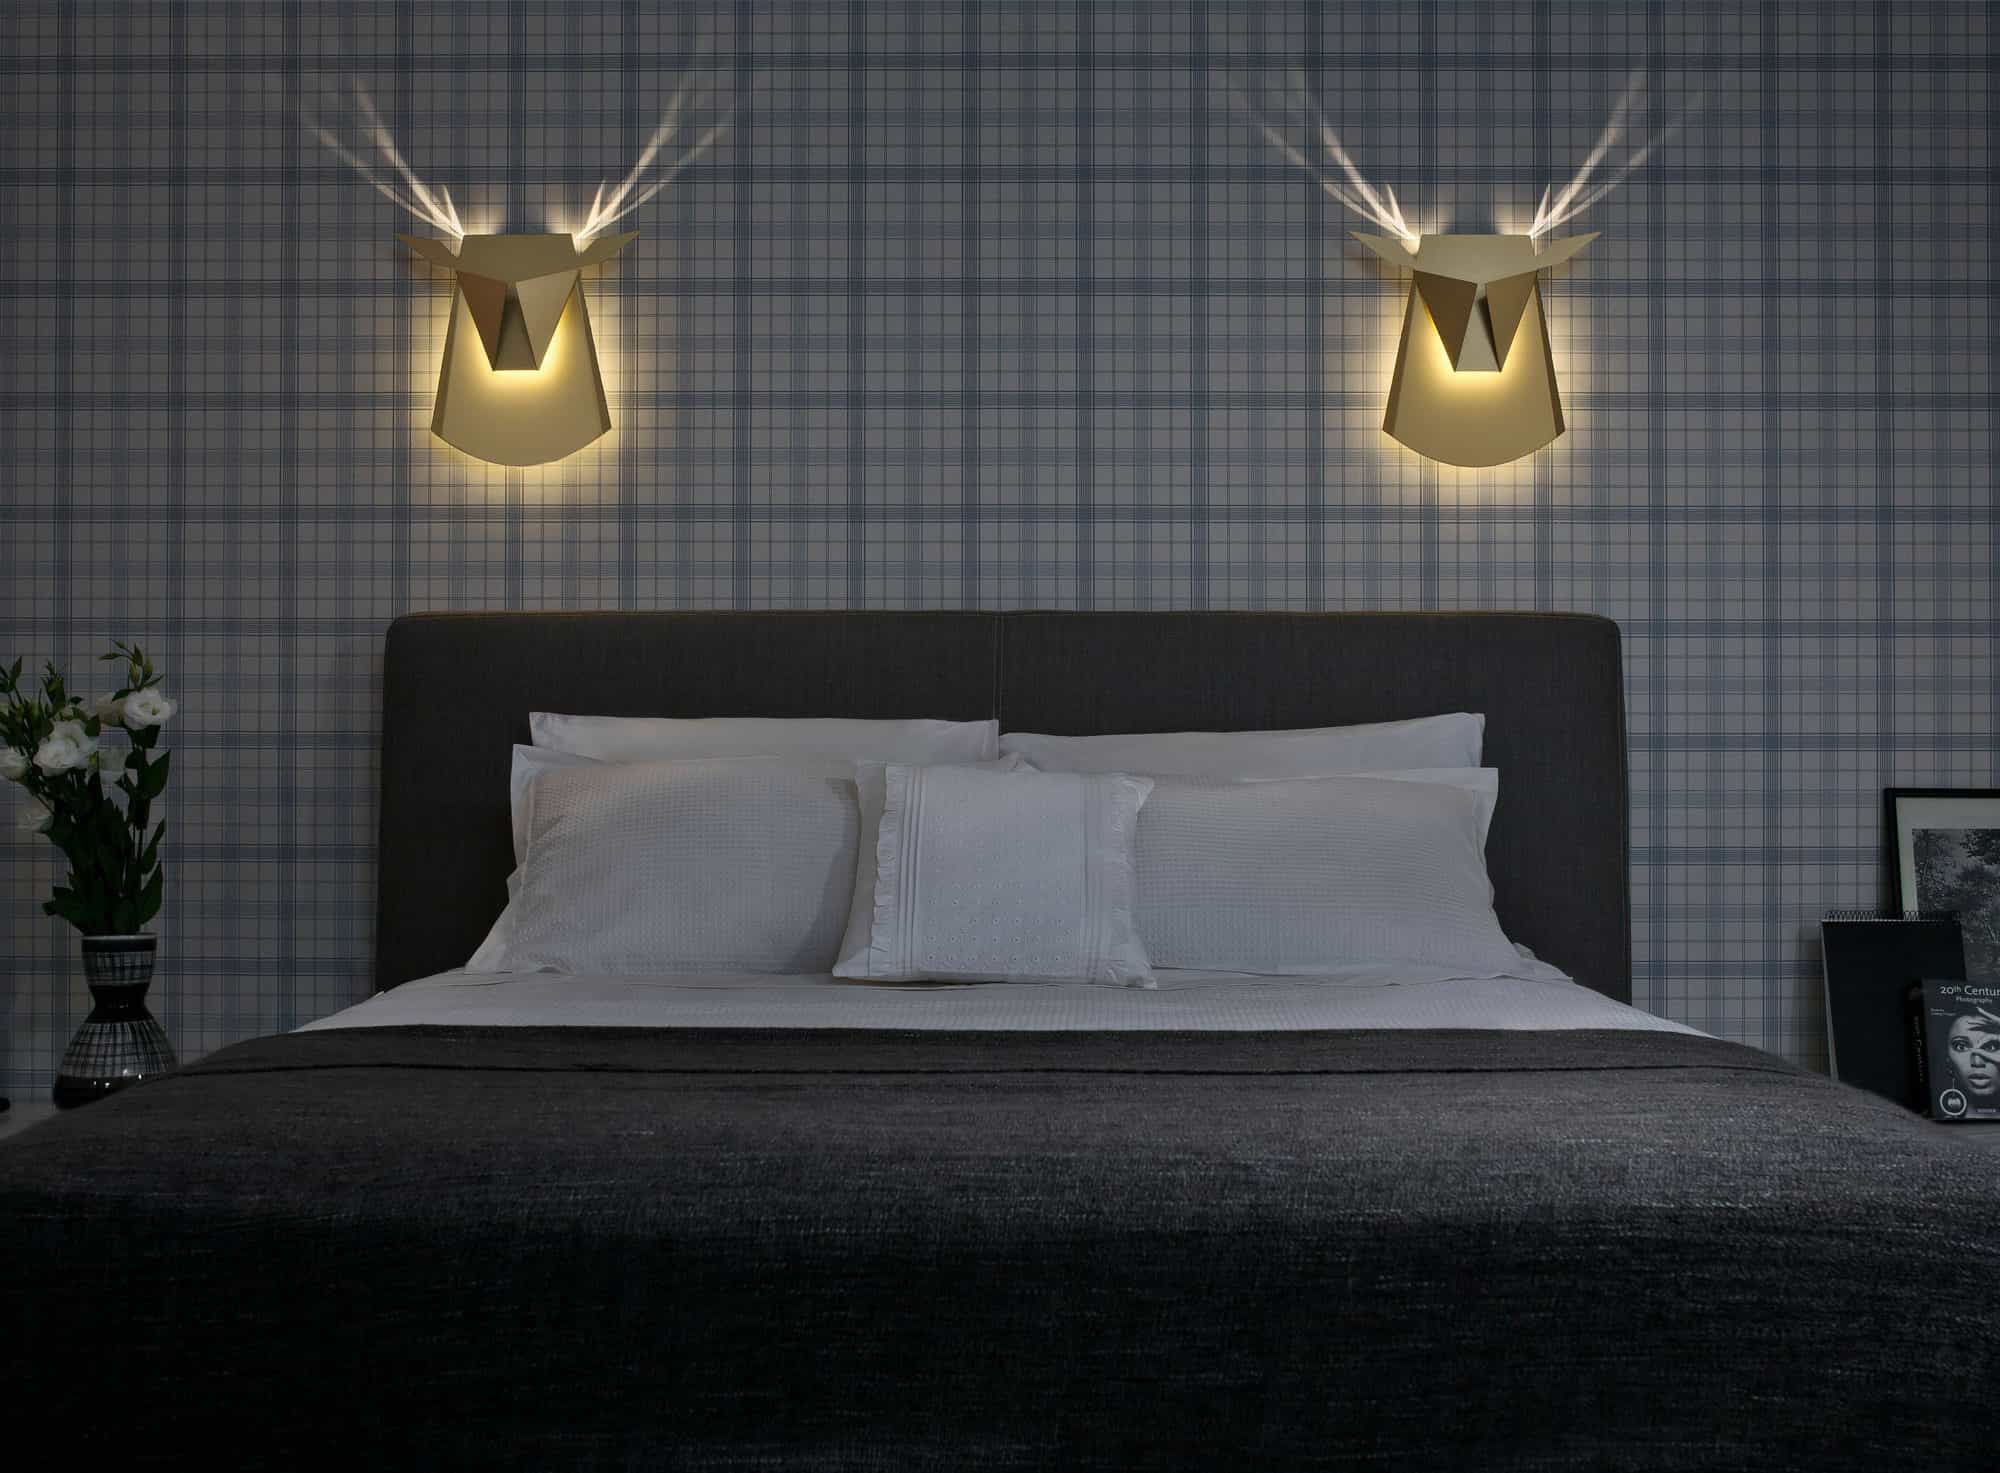 15 lighting designs muse living creatures